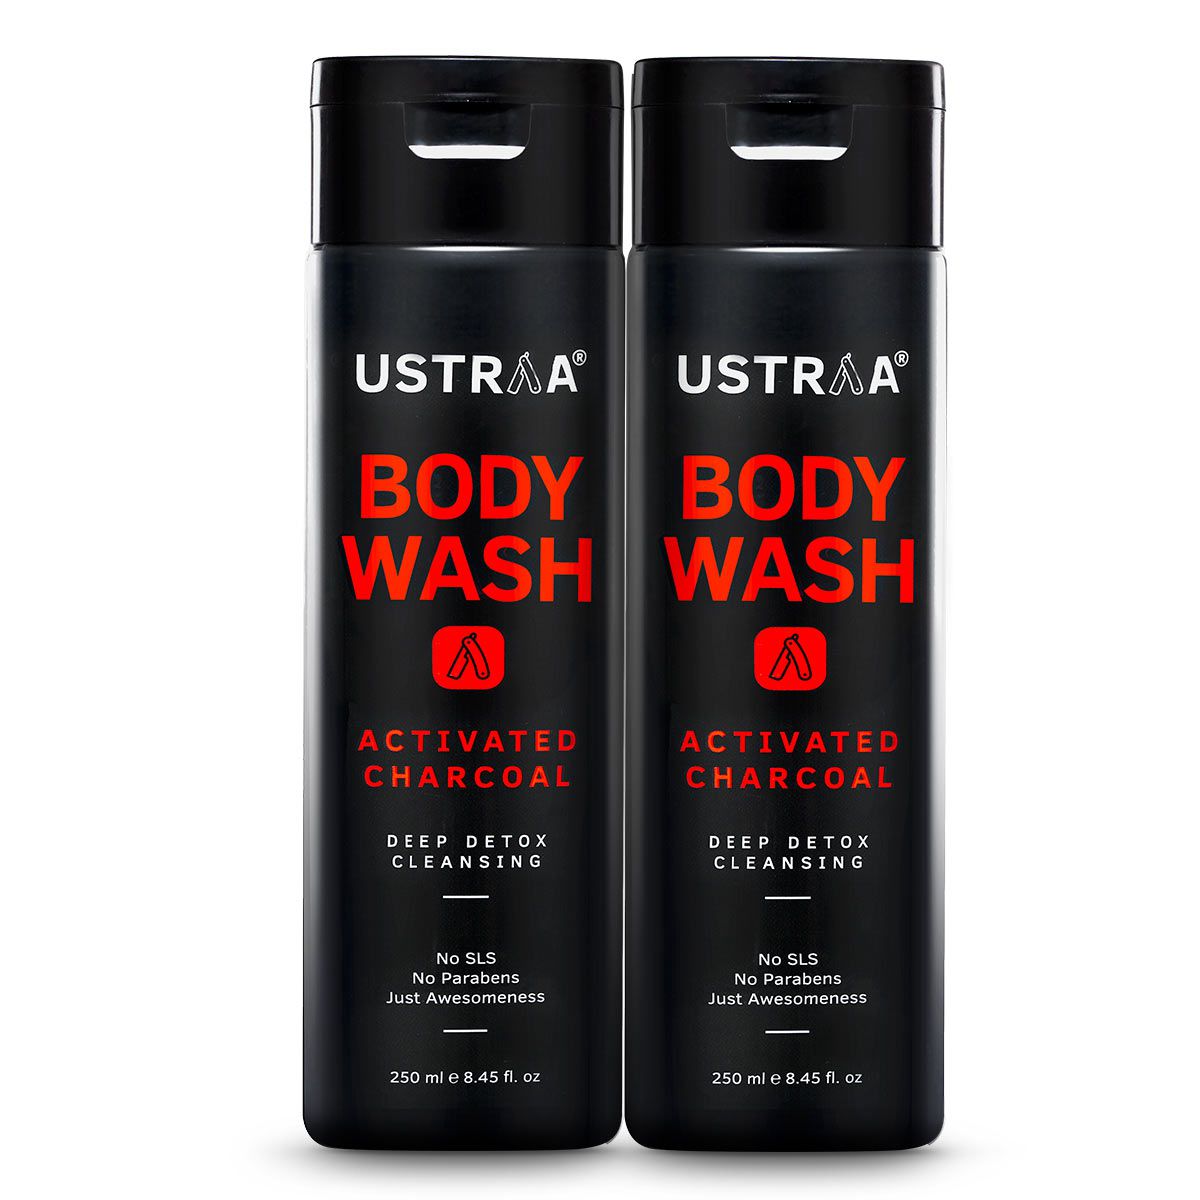     			Ustraa Body Wash-Activated Charcoal - 200ml Each (Pack of 2)